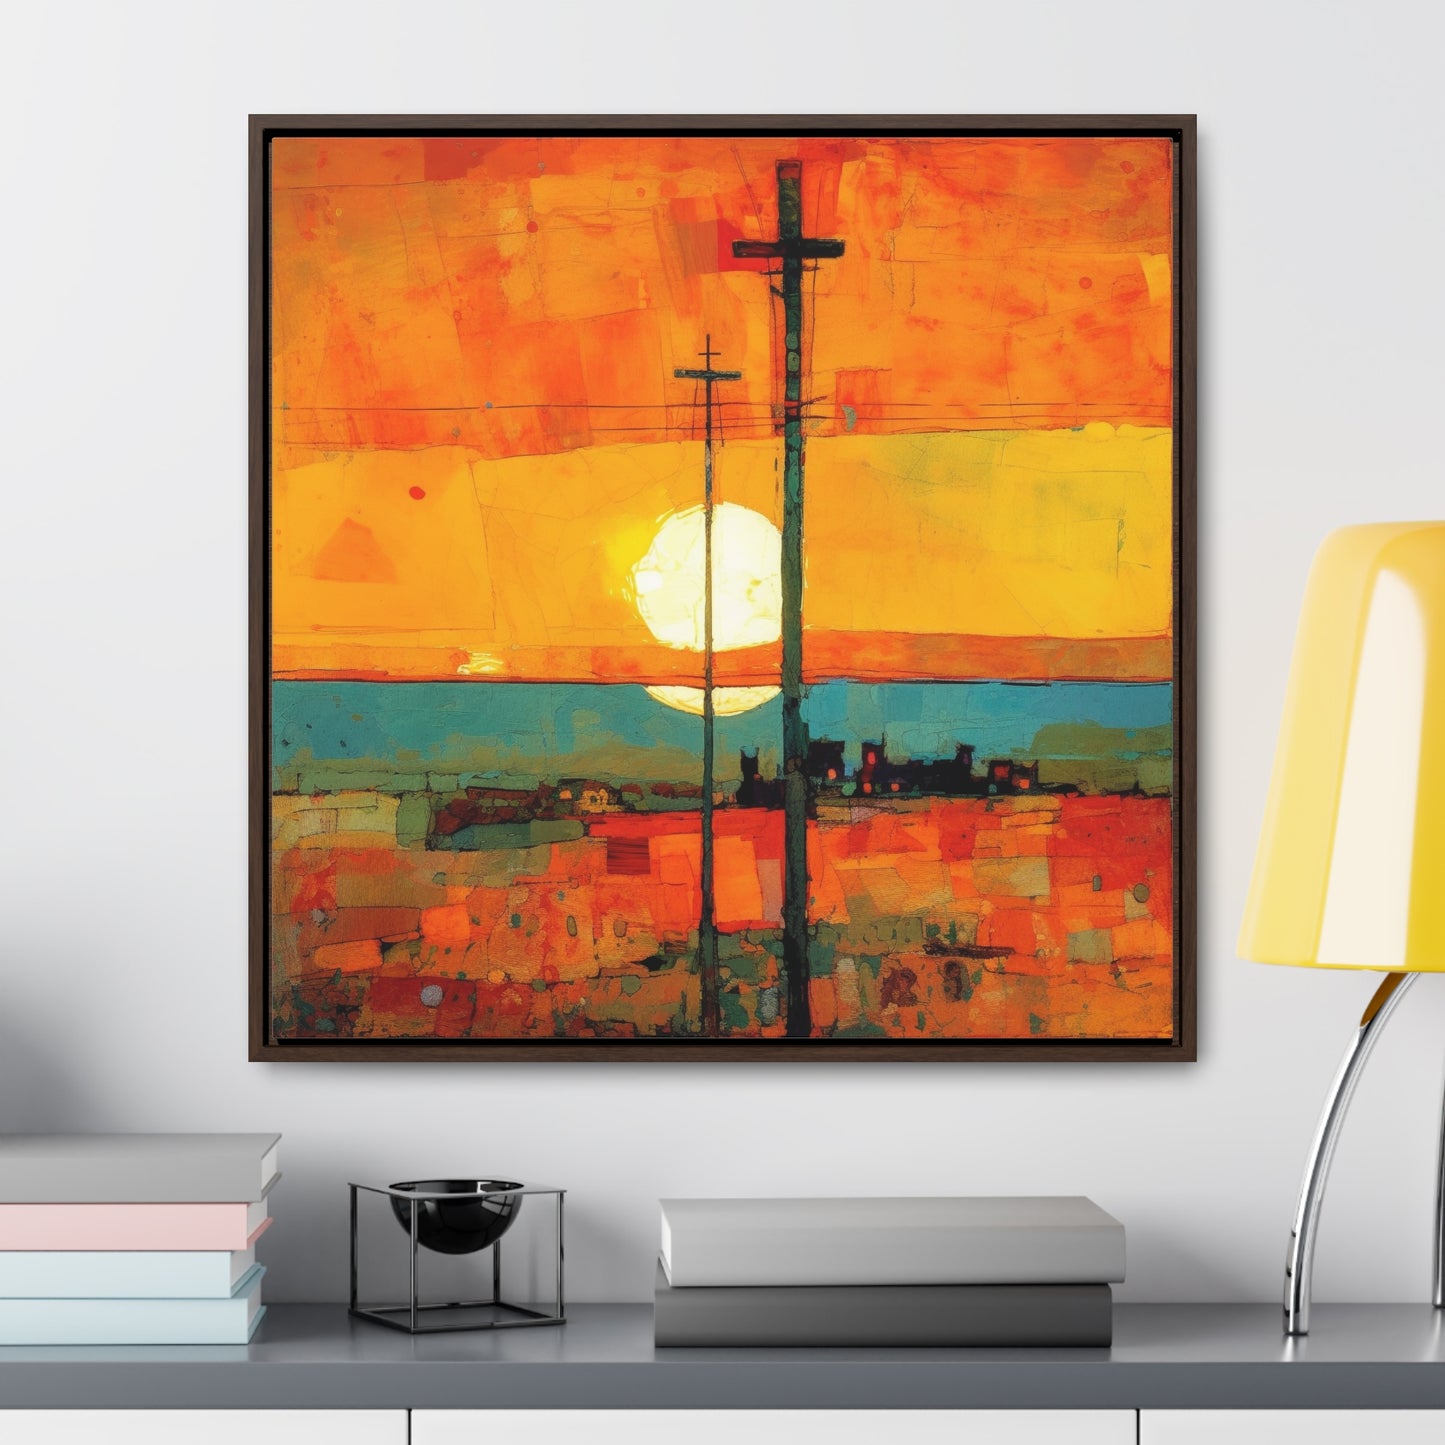 Land of the Sun 67, Valentinii, Gallery Canvas Wraps, Square Frame